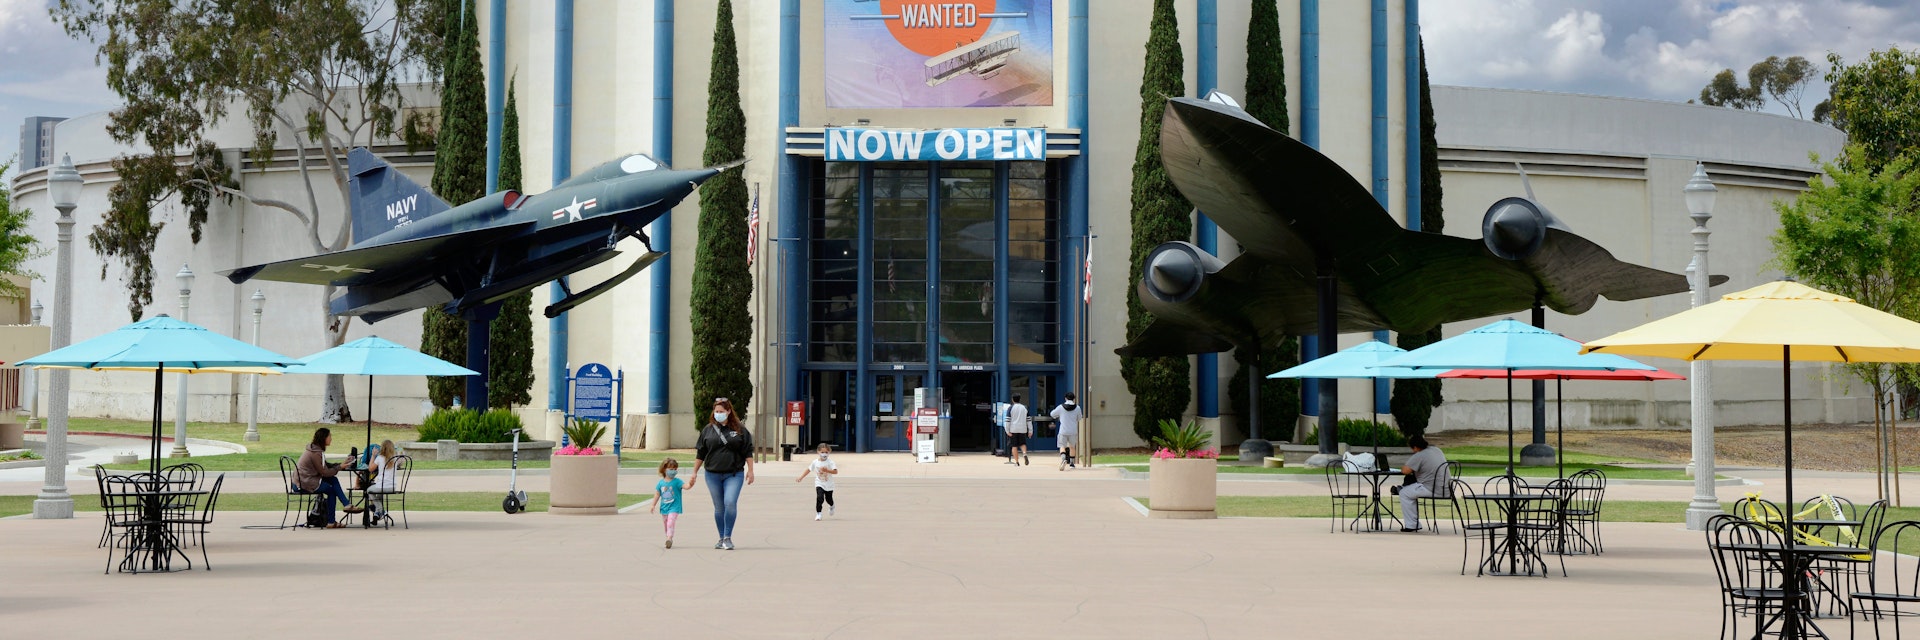 Outside the San Diego Air and Space Museum in Balboa Park with a Lockheed A12 Oxcart and Convair YF2Y-1 on either side of the entrance